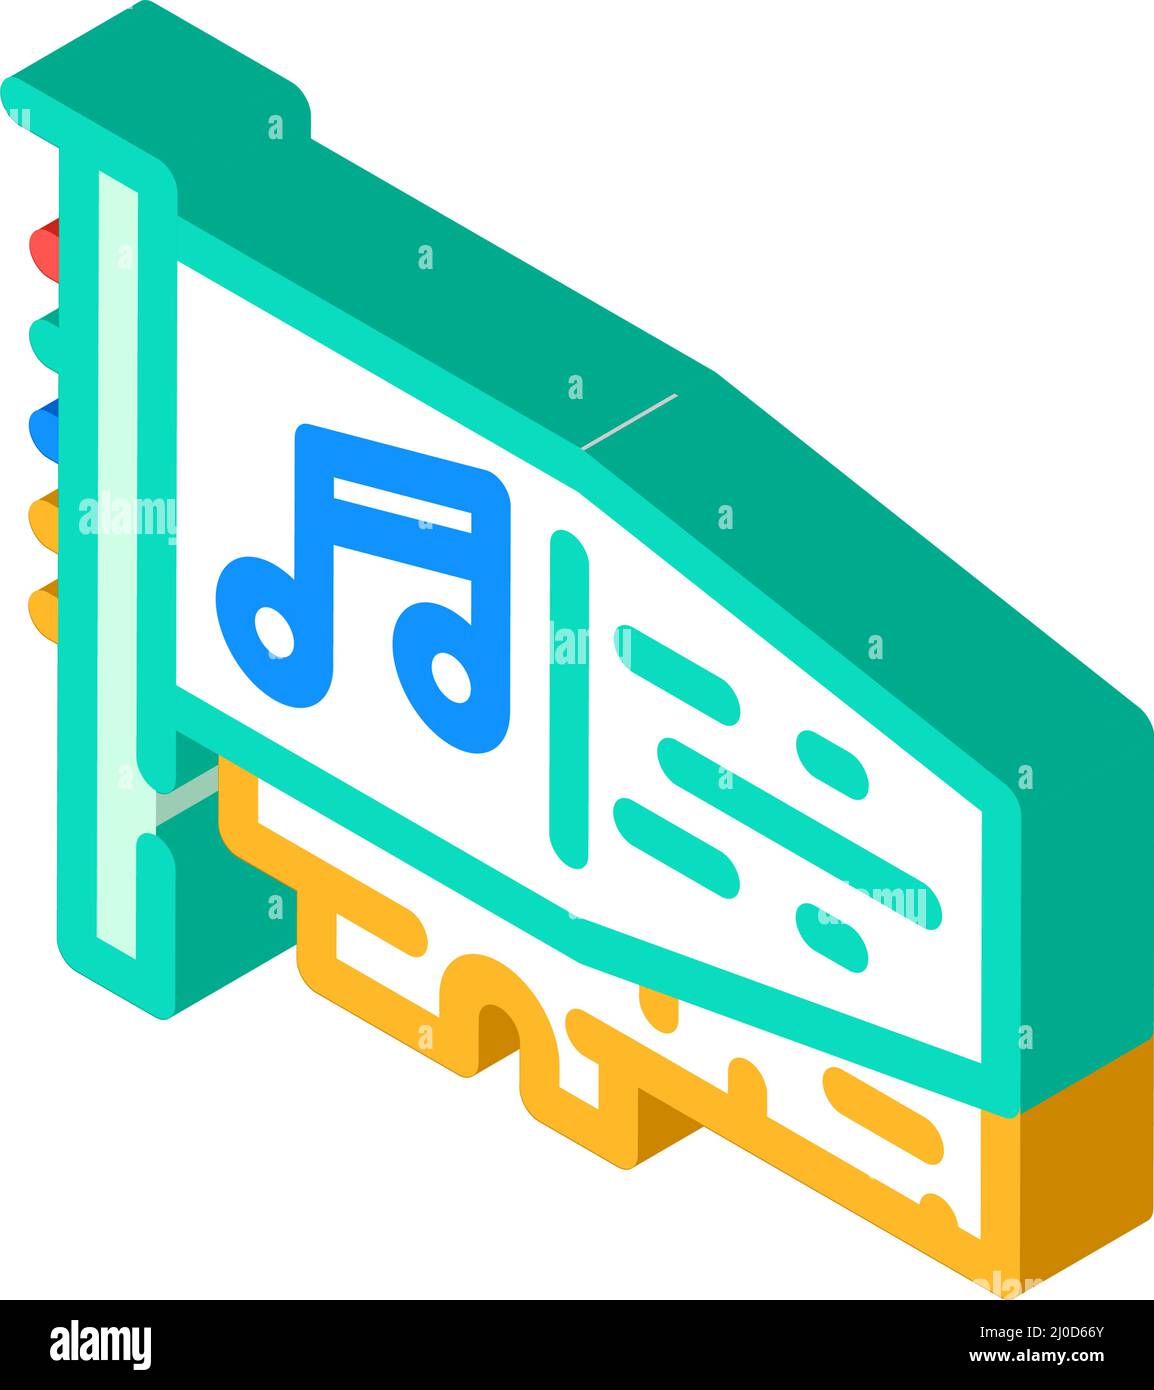 sound card isometric icon vector illustration Stock Vector